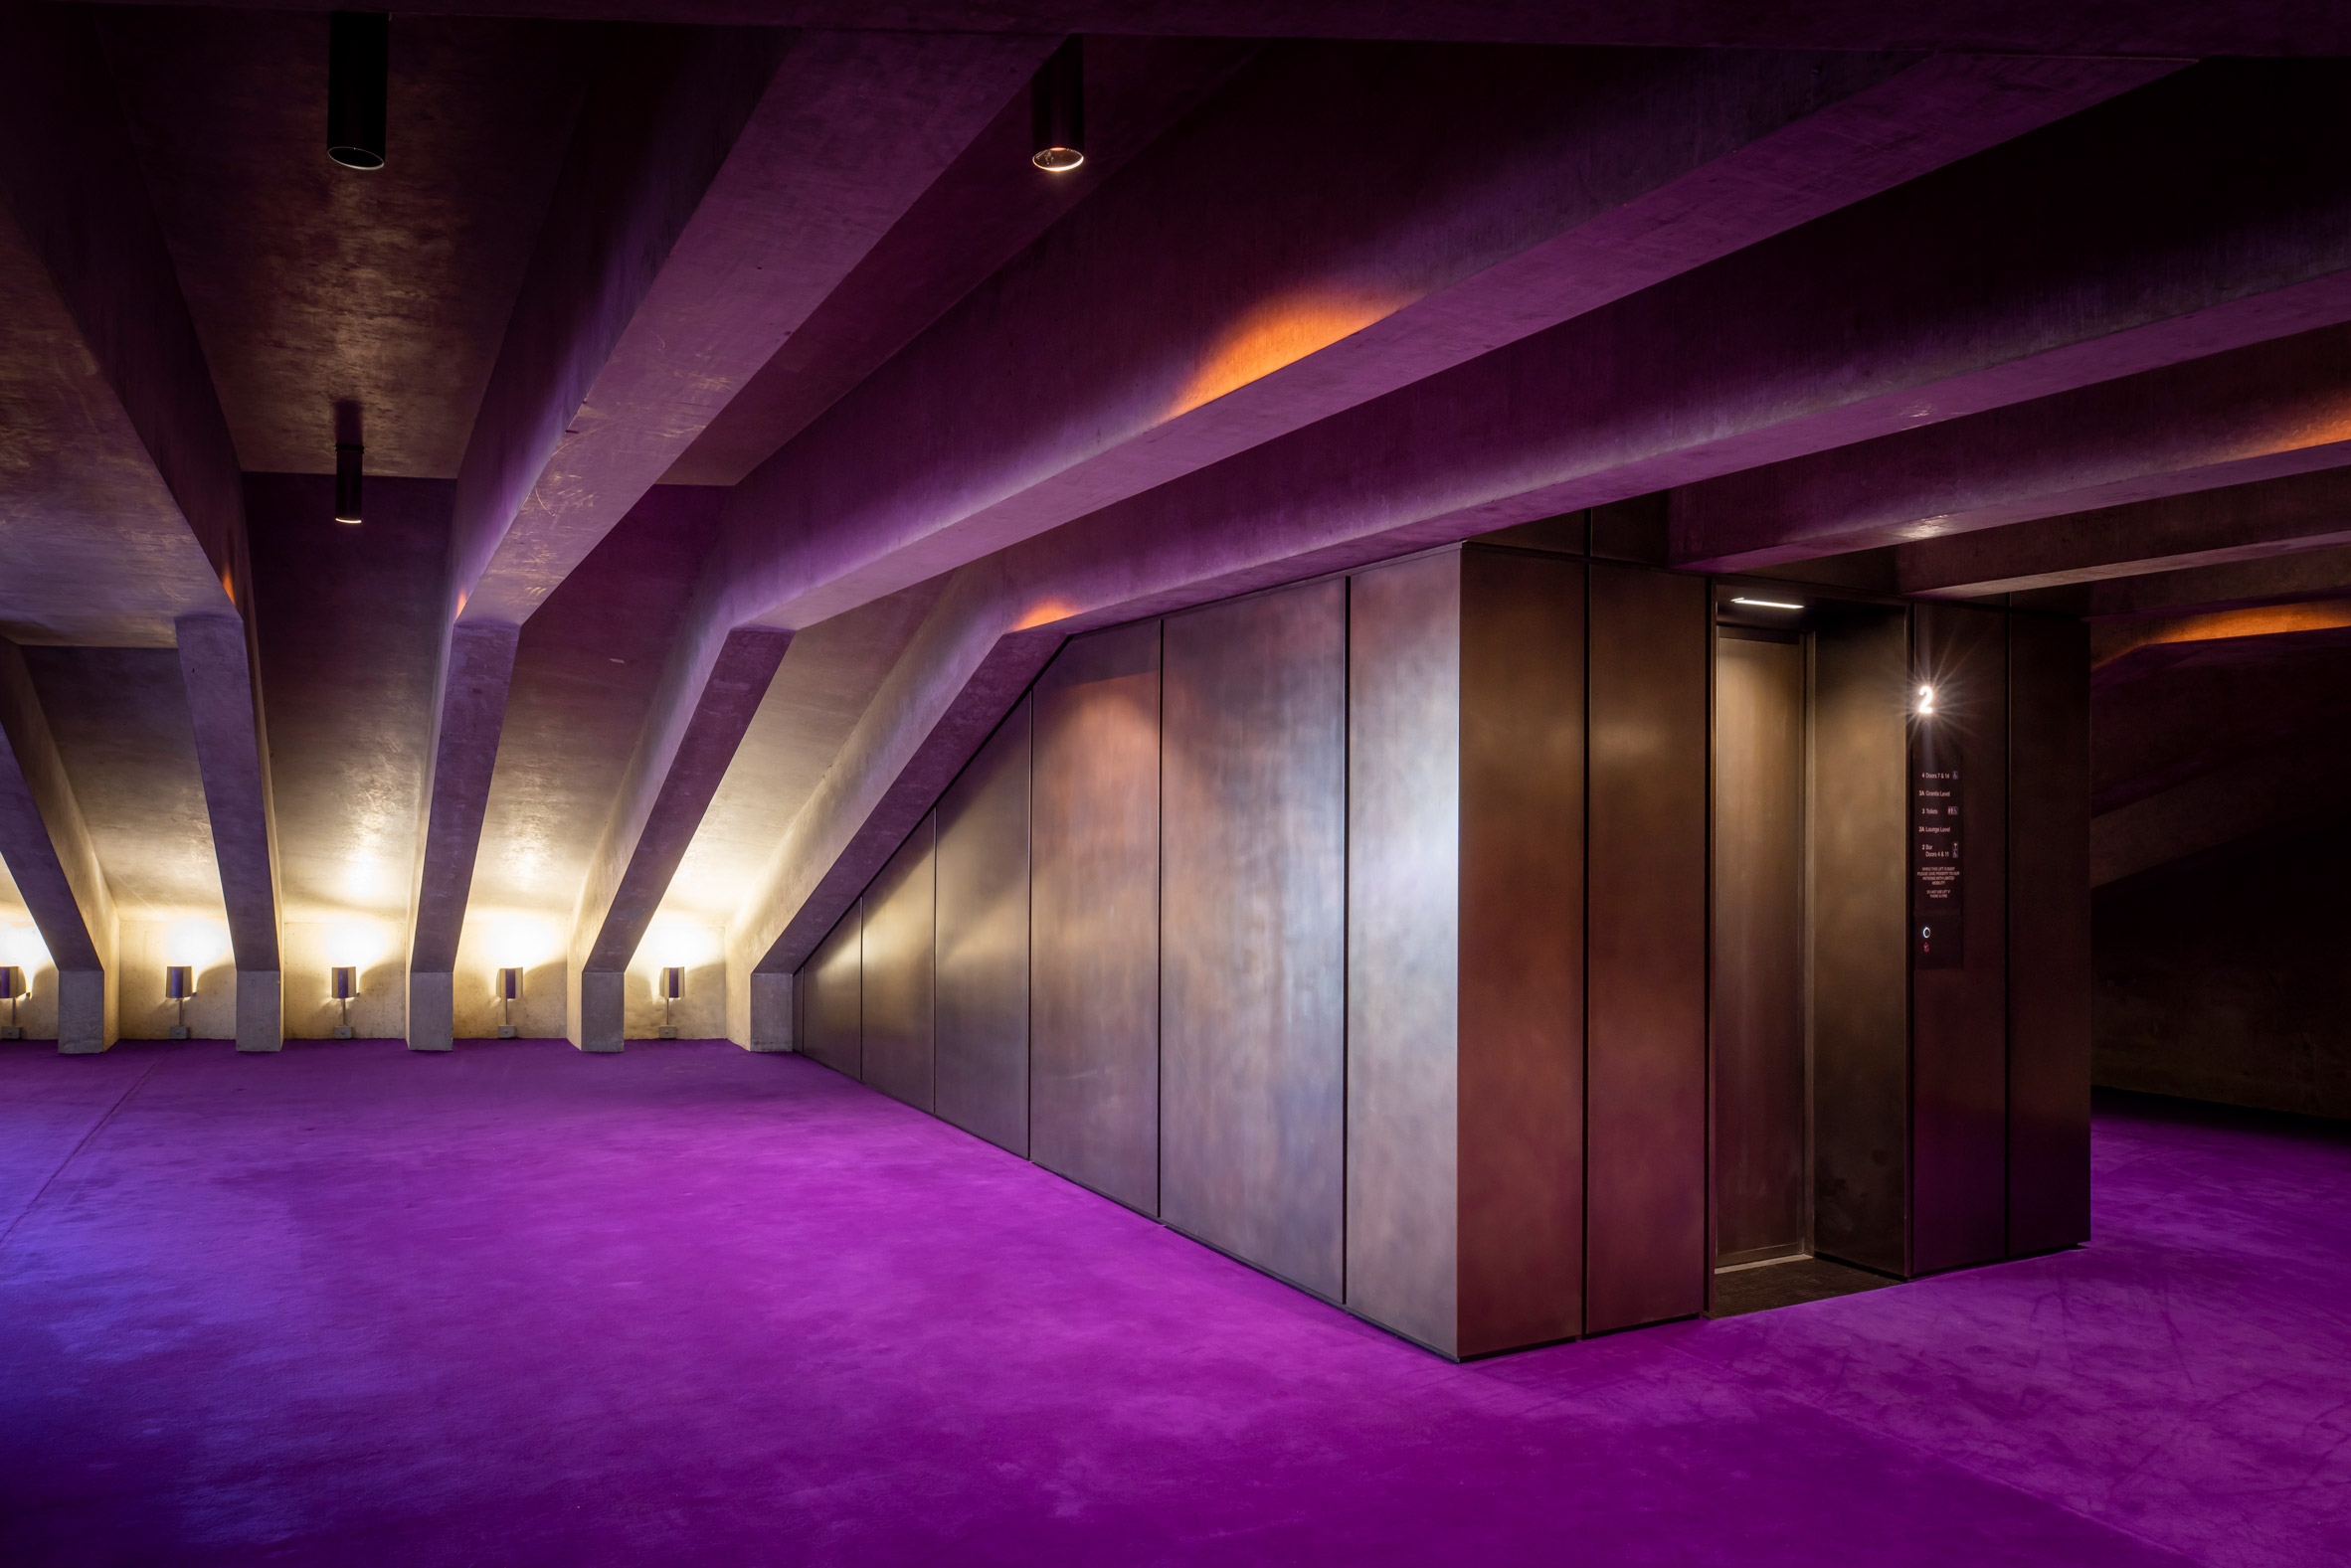 Circulation space inside Sydney Opera House with purple carpets